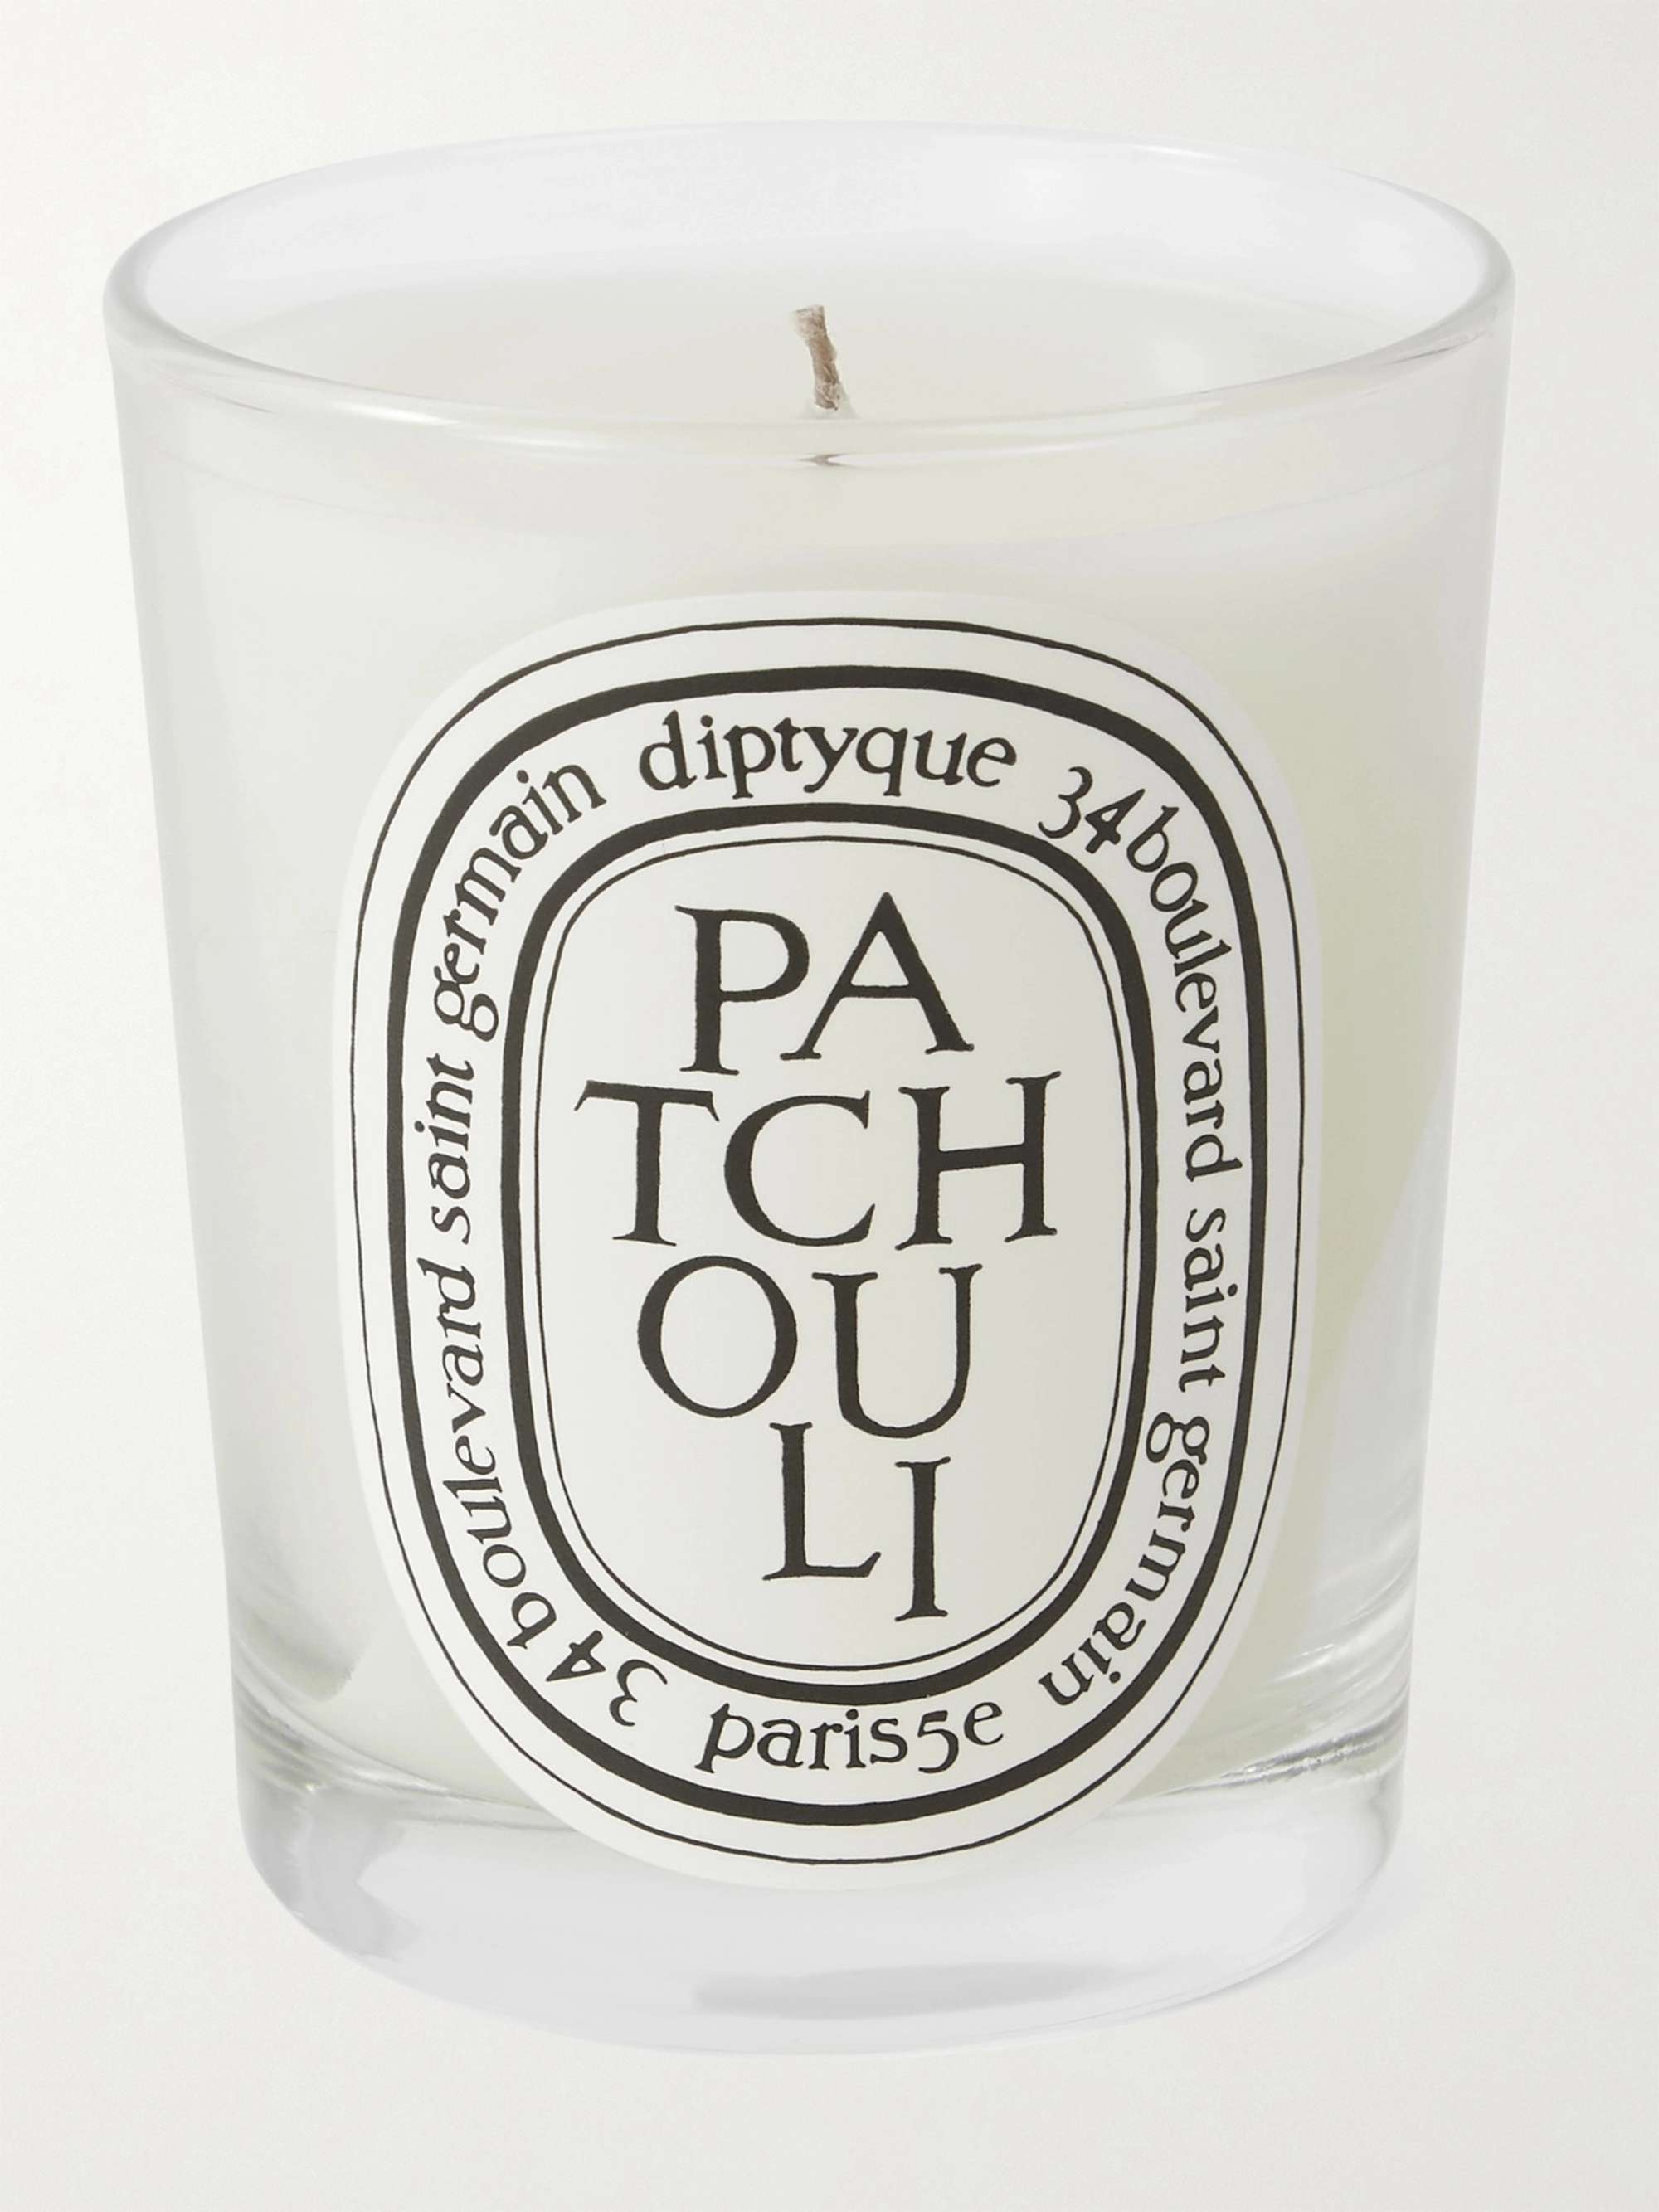 DIPTYQUE Patchouli Scented Candle, 190g